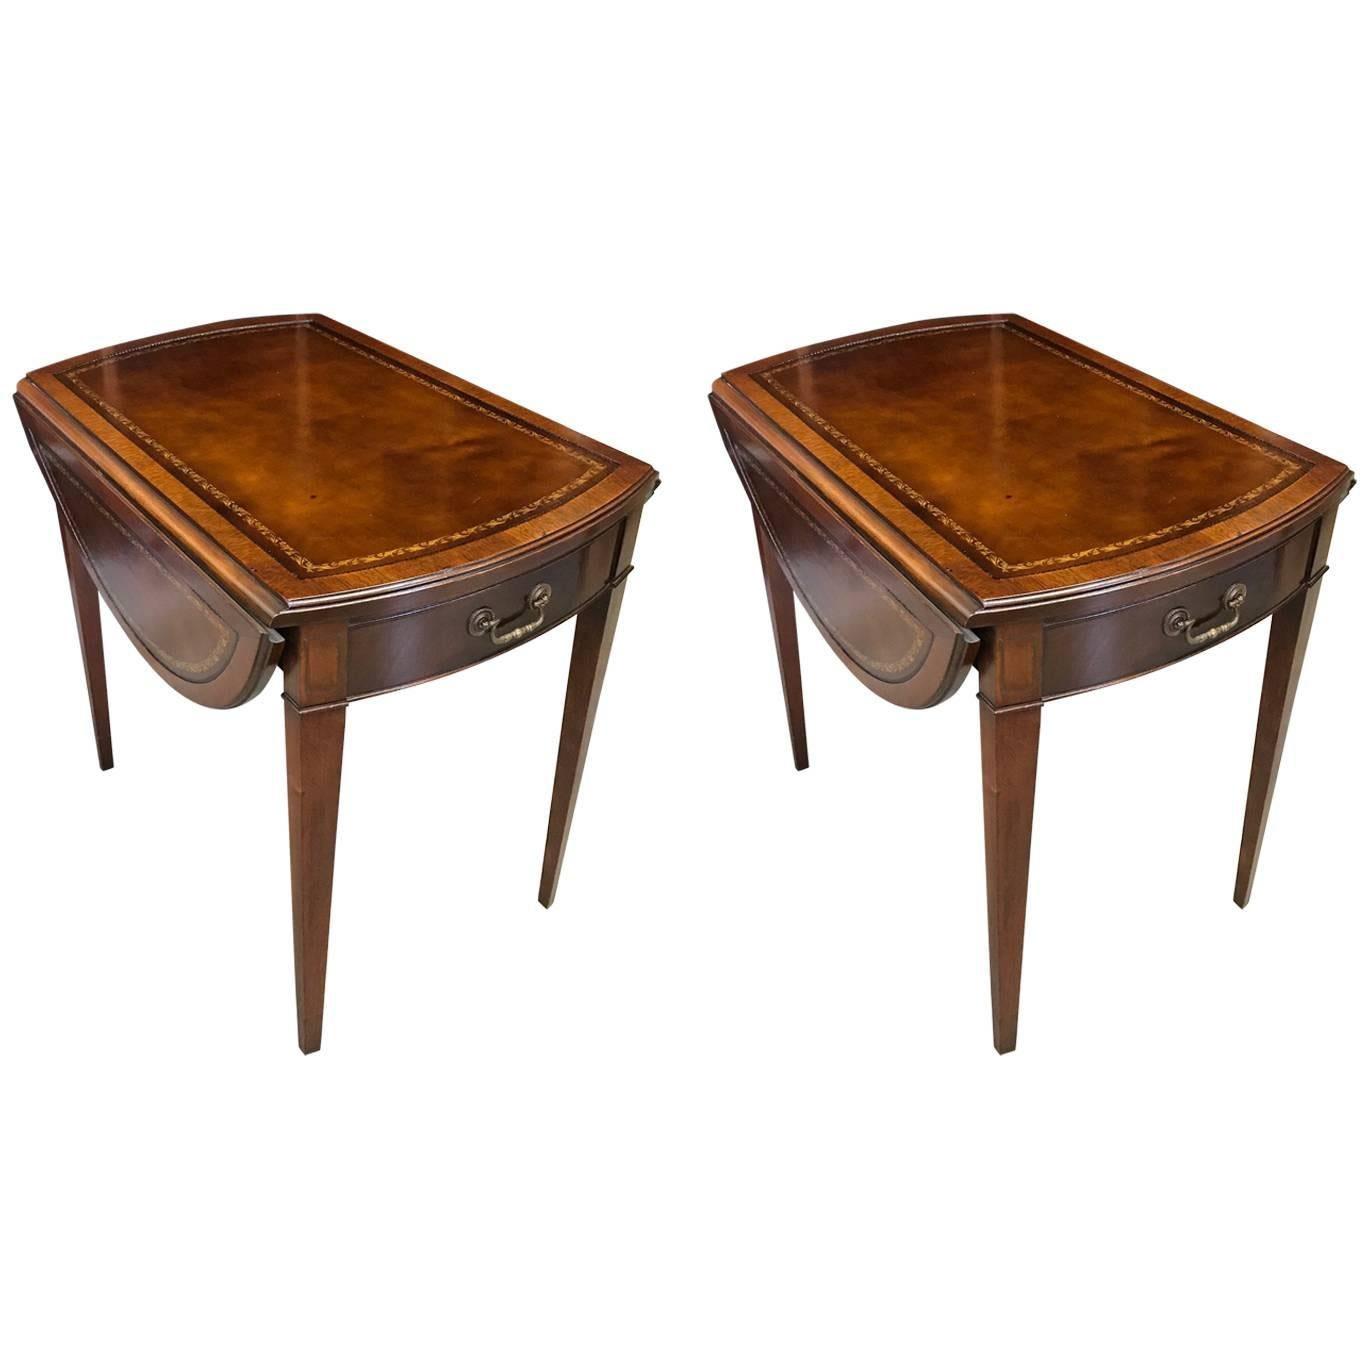 Pair of Pembroke Leather Topped Mahogany Tables